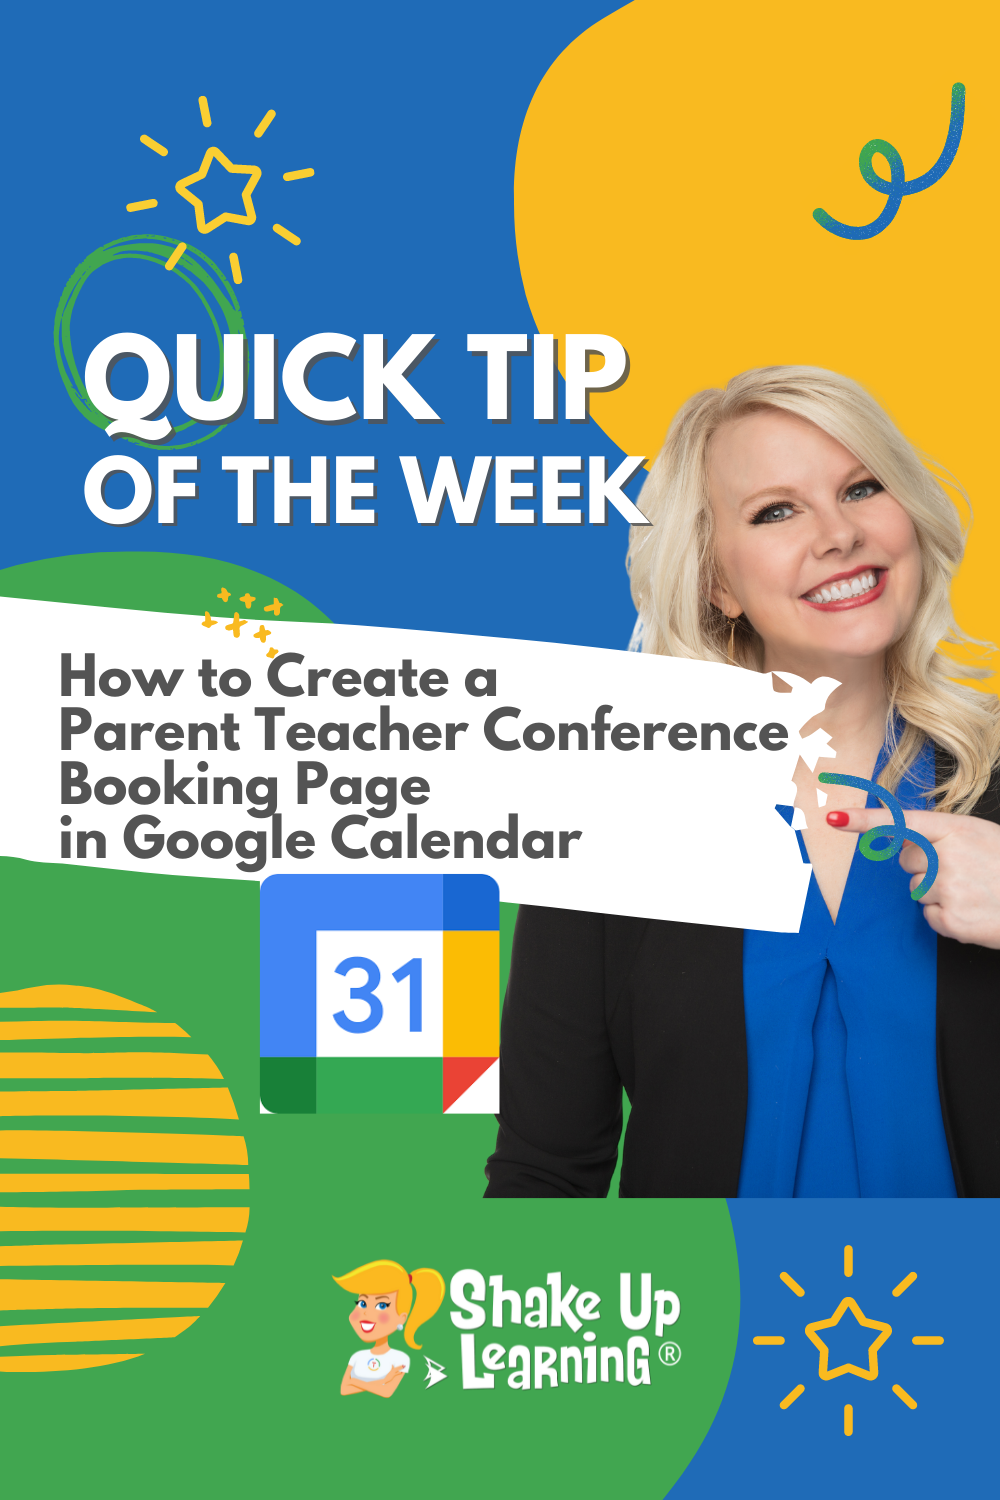 How to Create a Parent-Teacher Conference Booking Page in Google Calendar